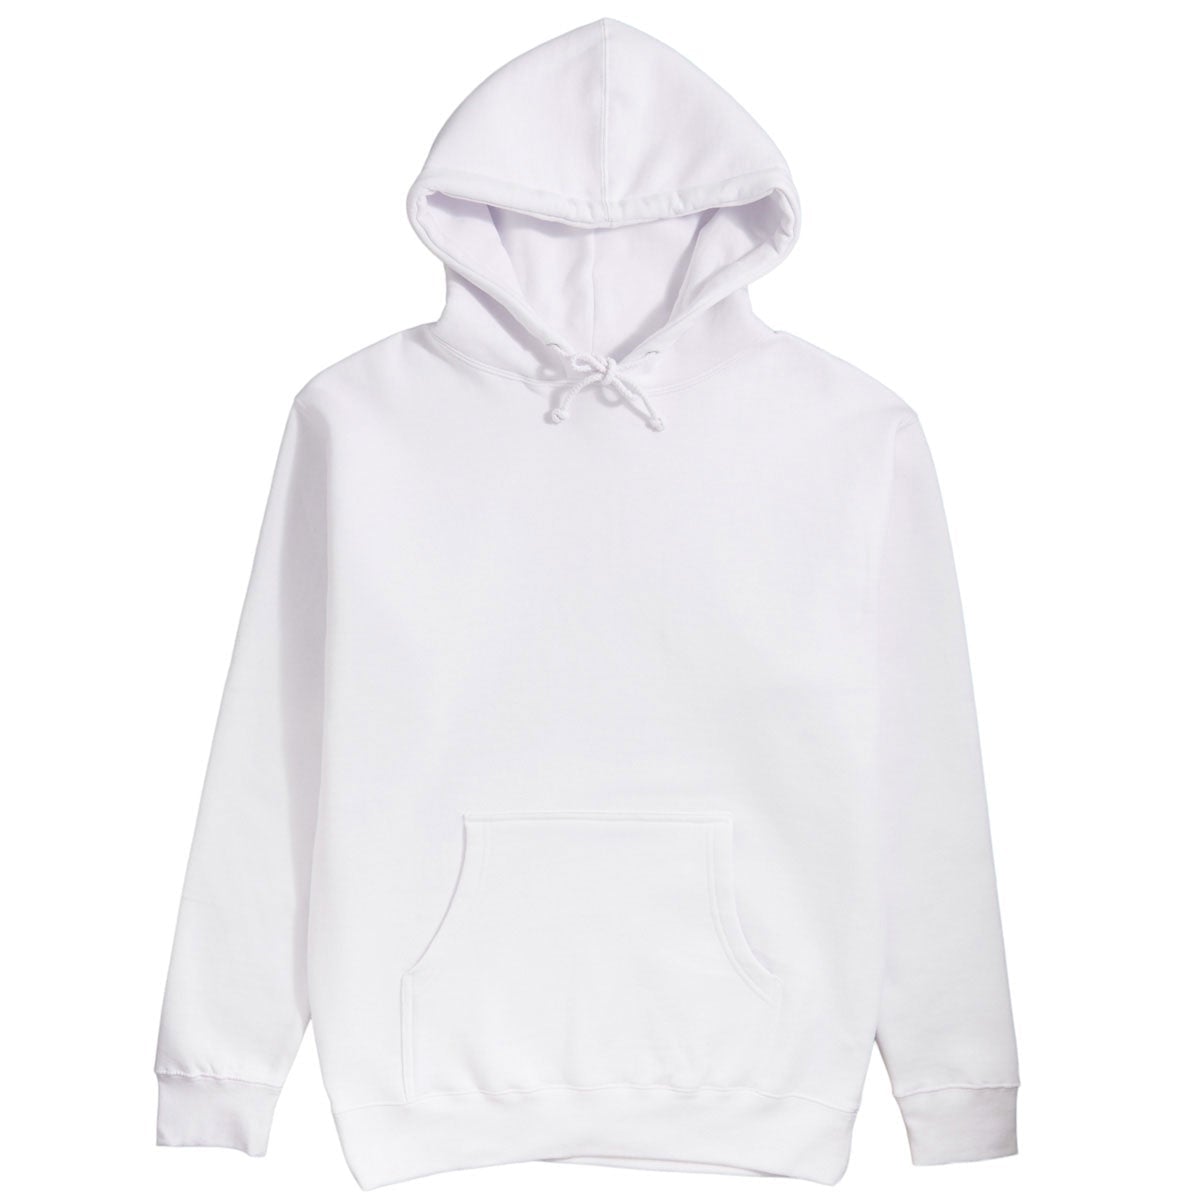 Converse Body Horror Pullover Hoodie image 3